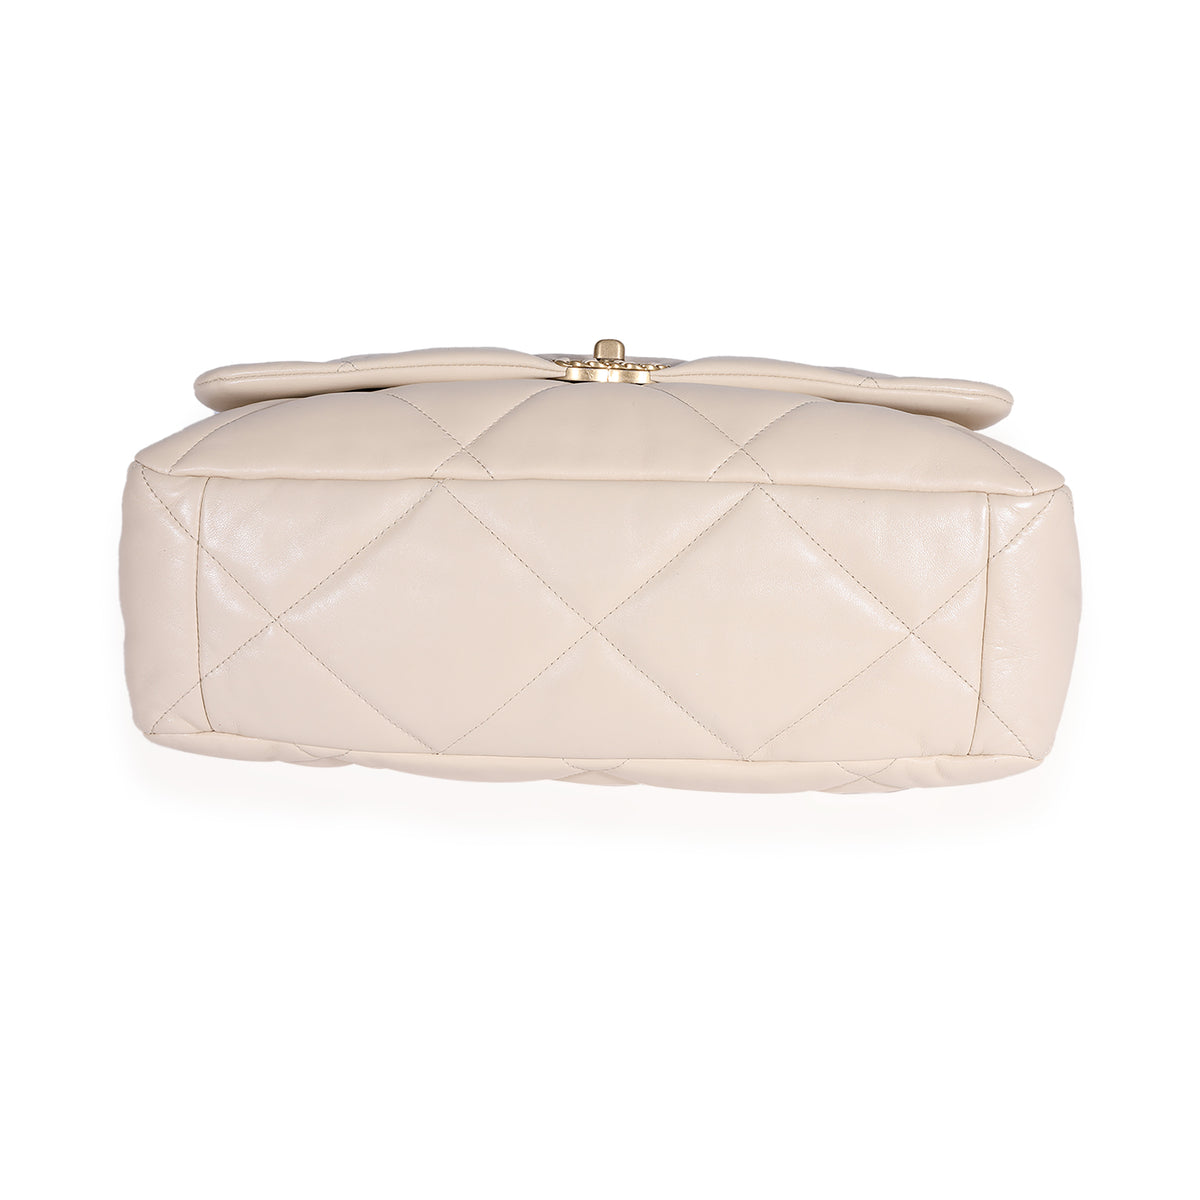 Chanel Beige Quilted Lambskin Chanel 19 Maxi Flap Bag